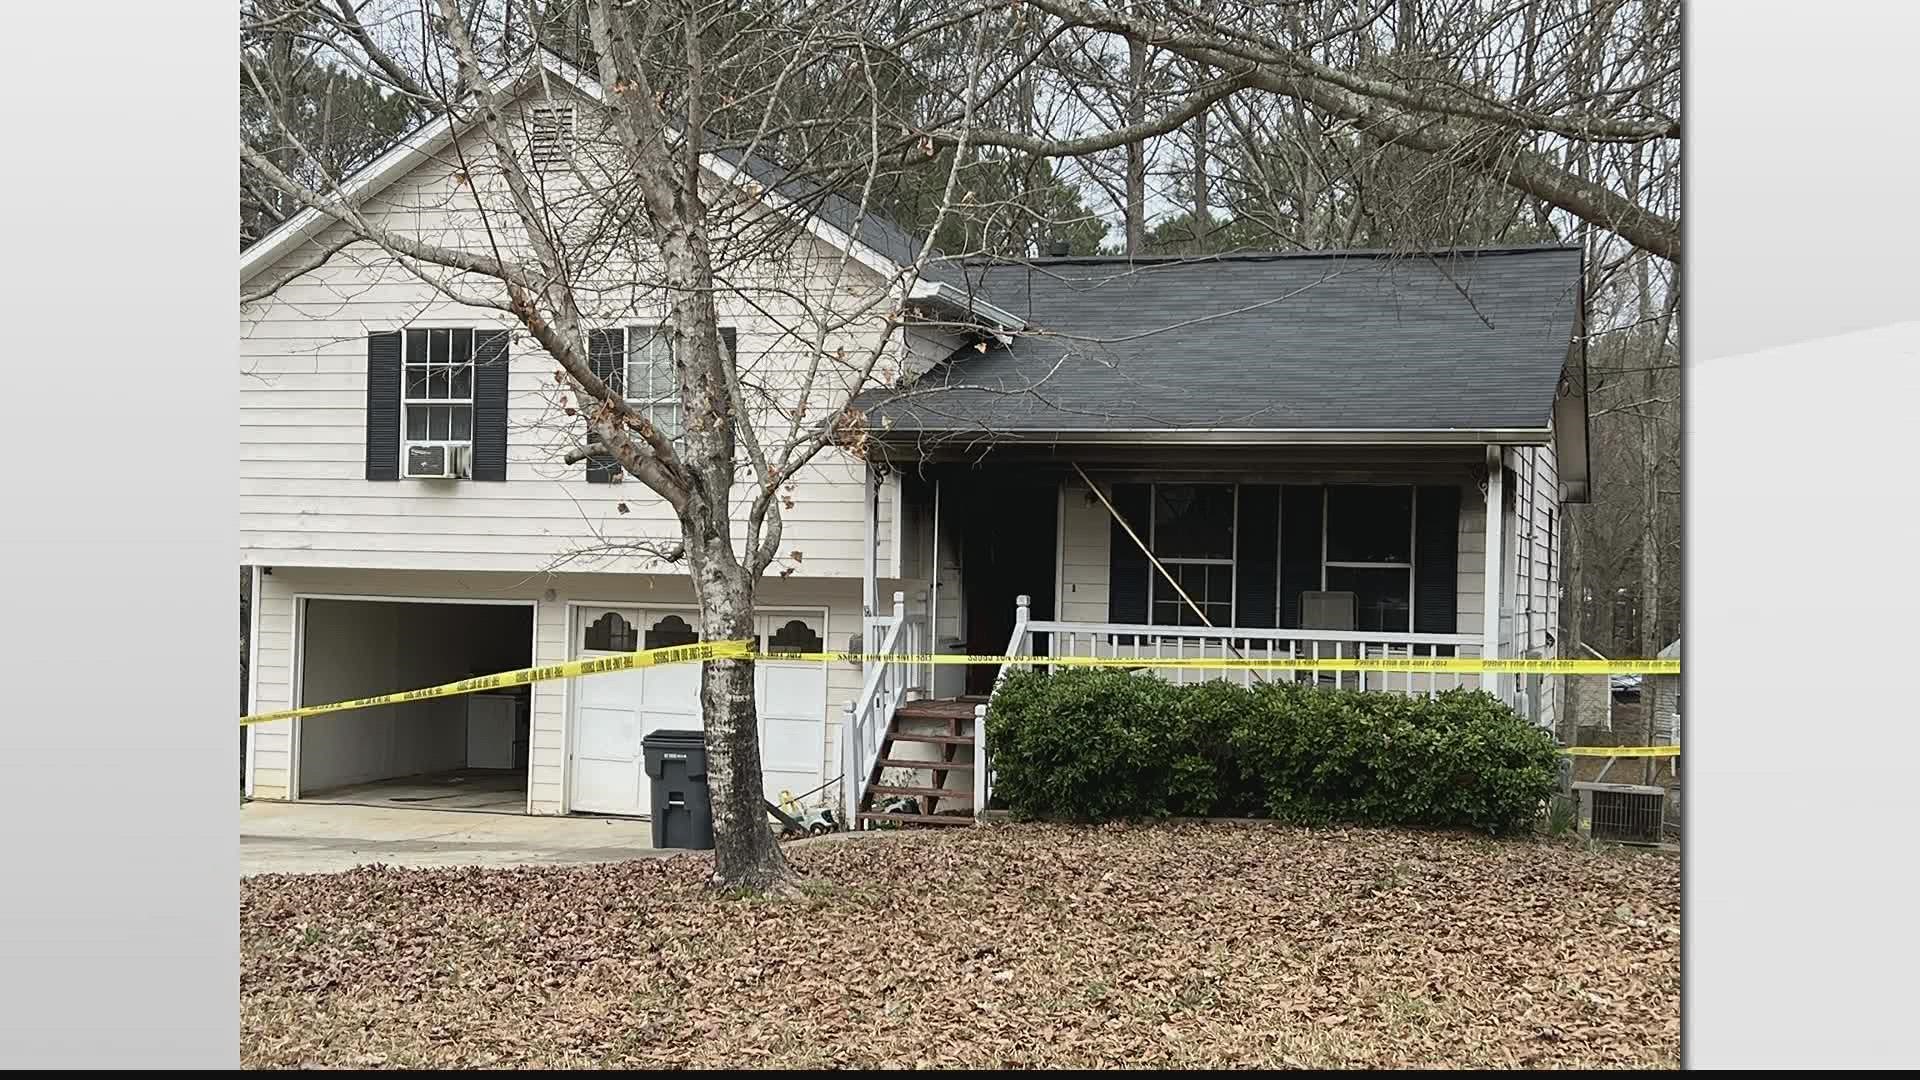 A 70-year-old woman was killed while her grandson was treated for smoke inhalation.